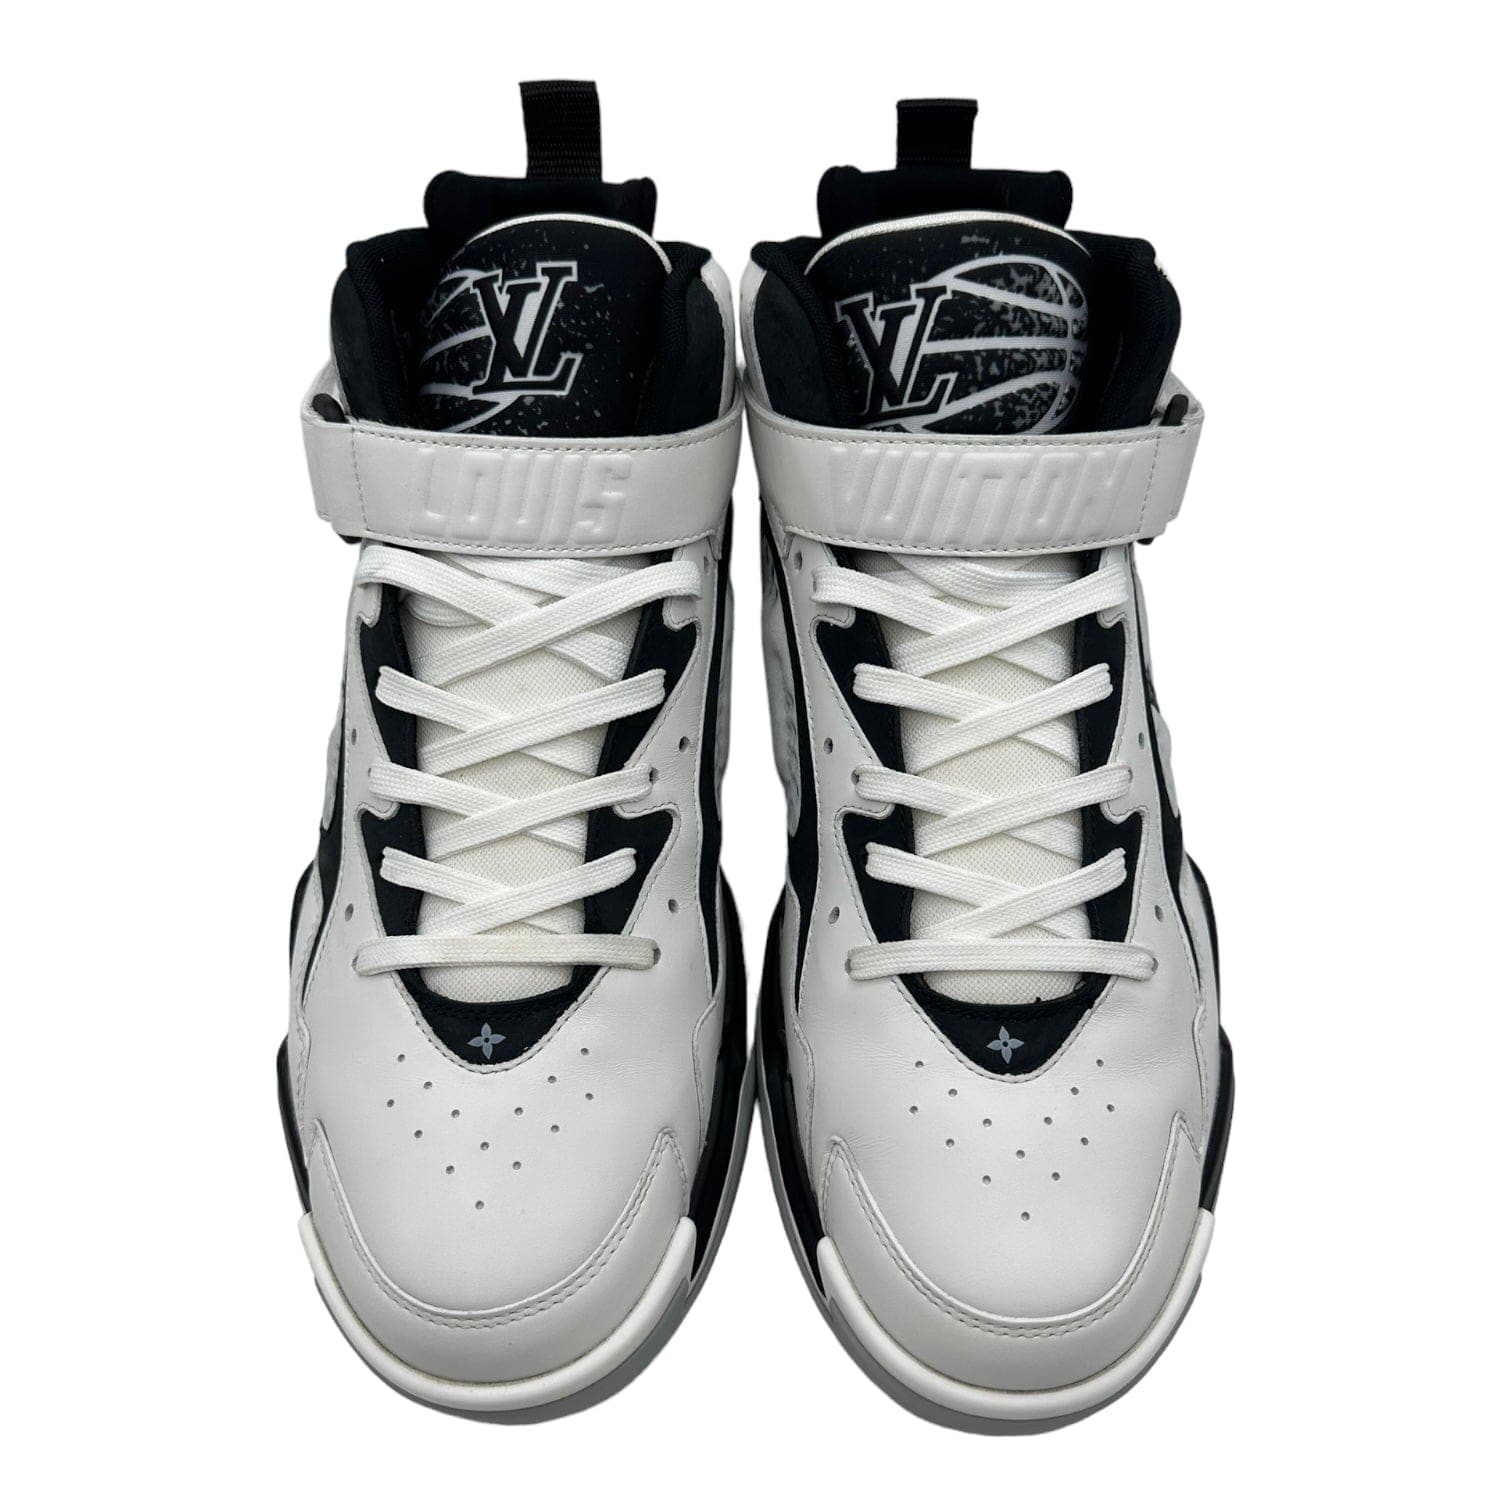 LV TRAINER 2 SNEAKERS – Atypical